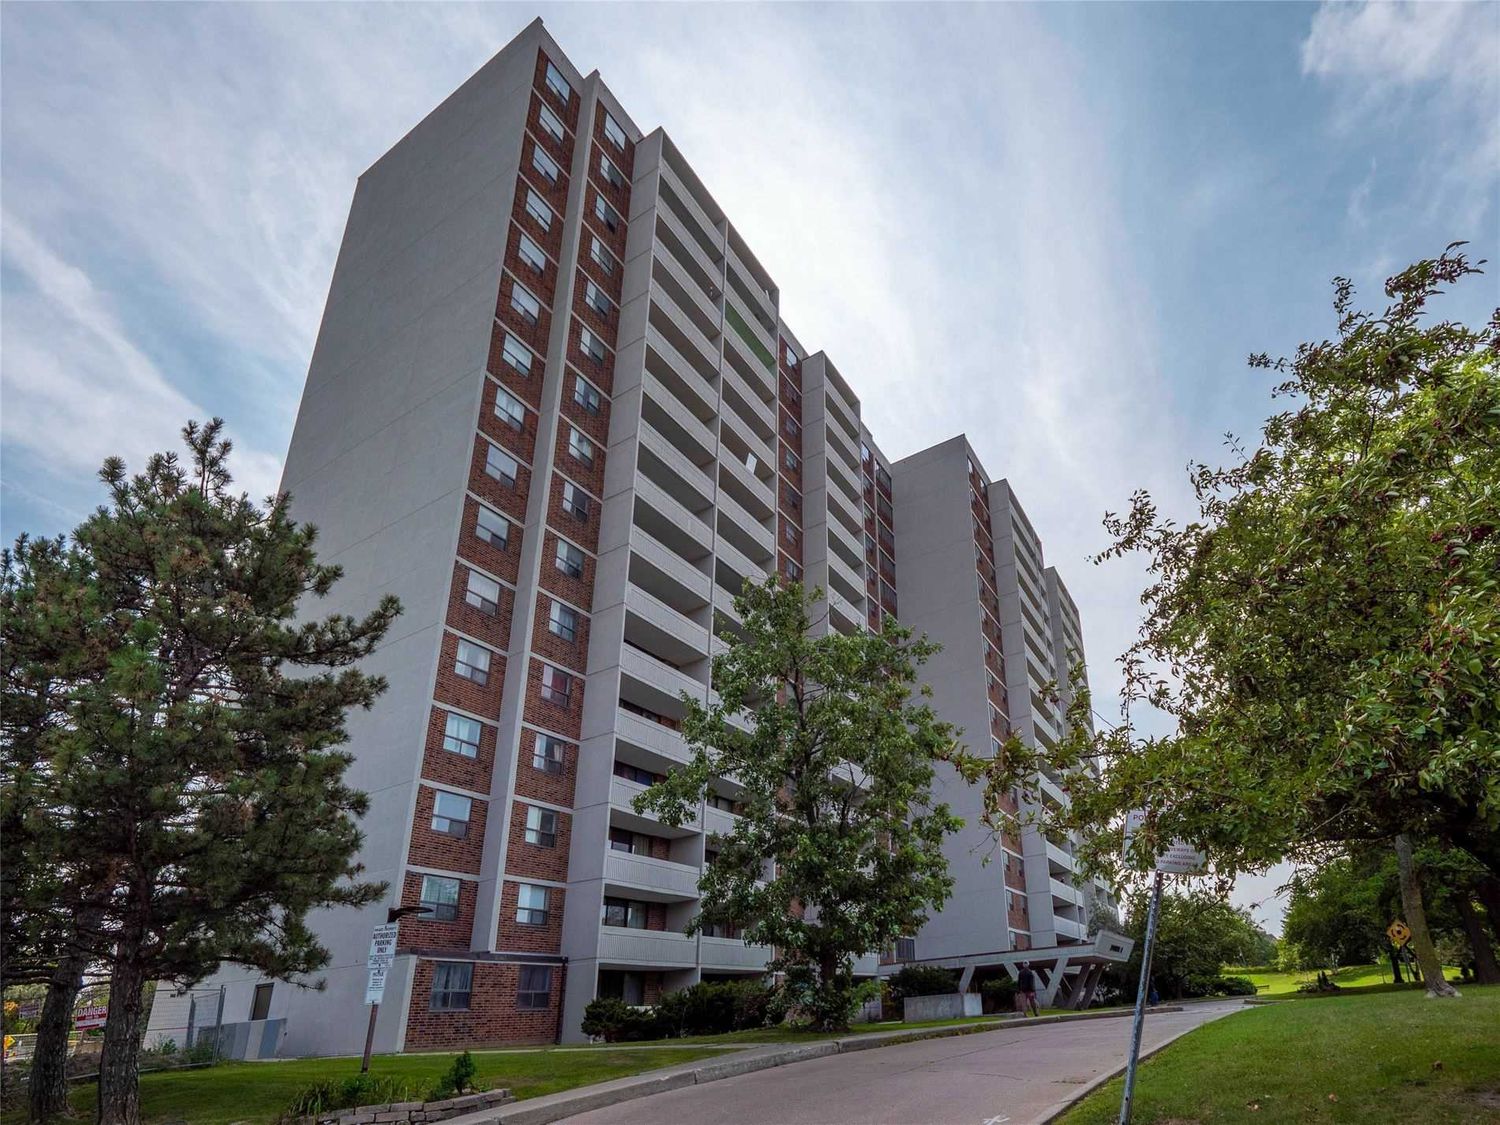 301 Prudential Drive. 301 Prudential Drive Condos is located in  Scarborough, Toronto - image #1 of 3